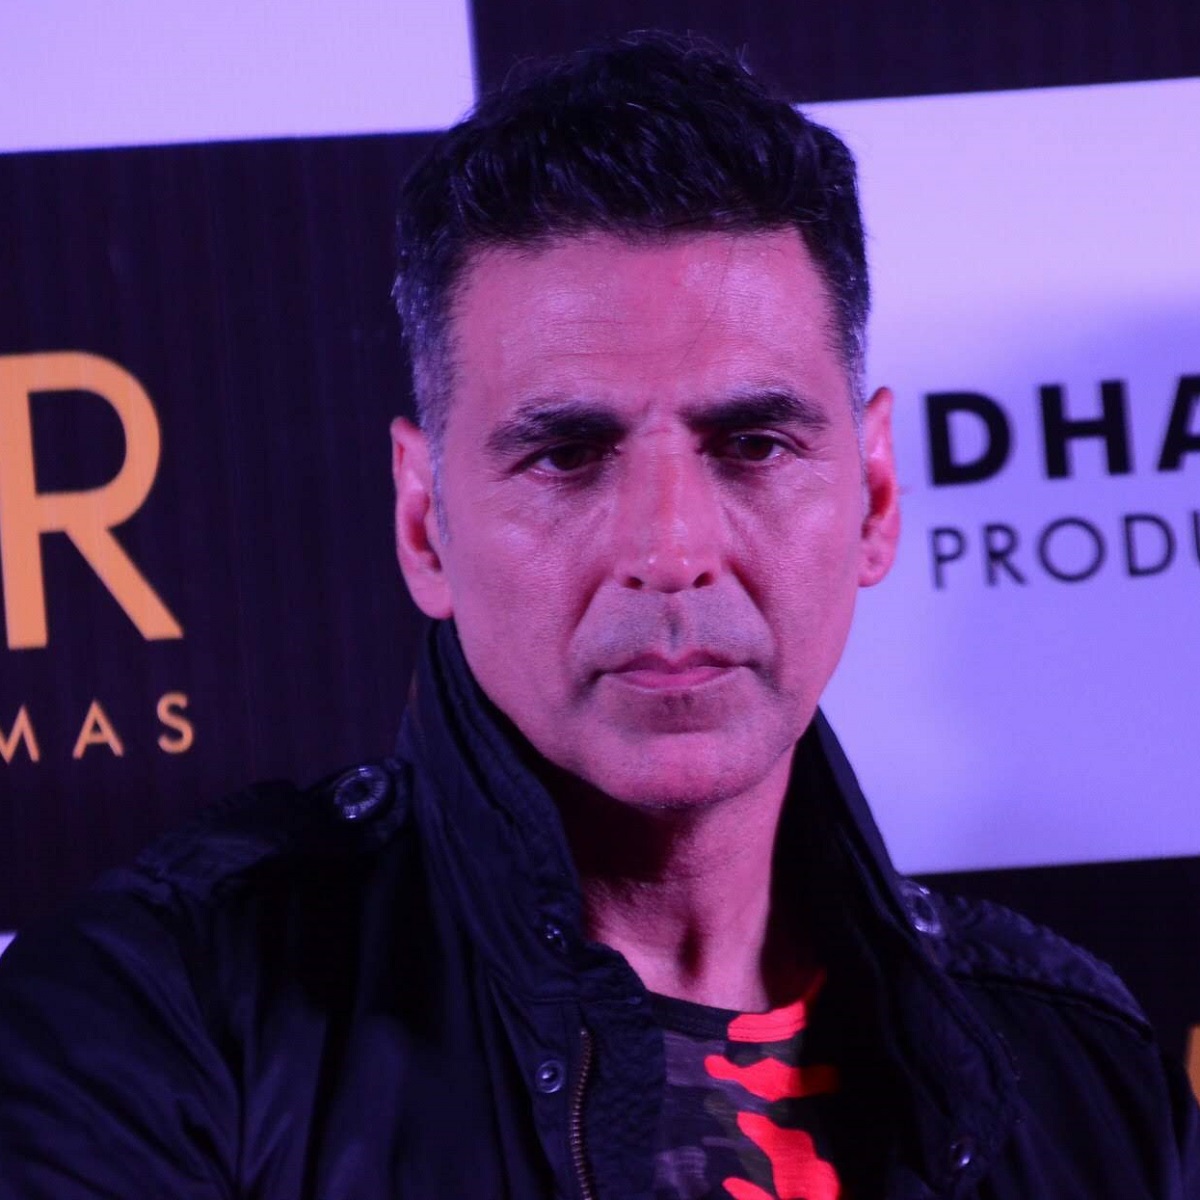 EXCLUSIVE: Who will direct Akshay Kumar's digital debut The End? 3 top directors in the race - FIND OUT